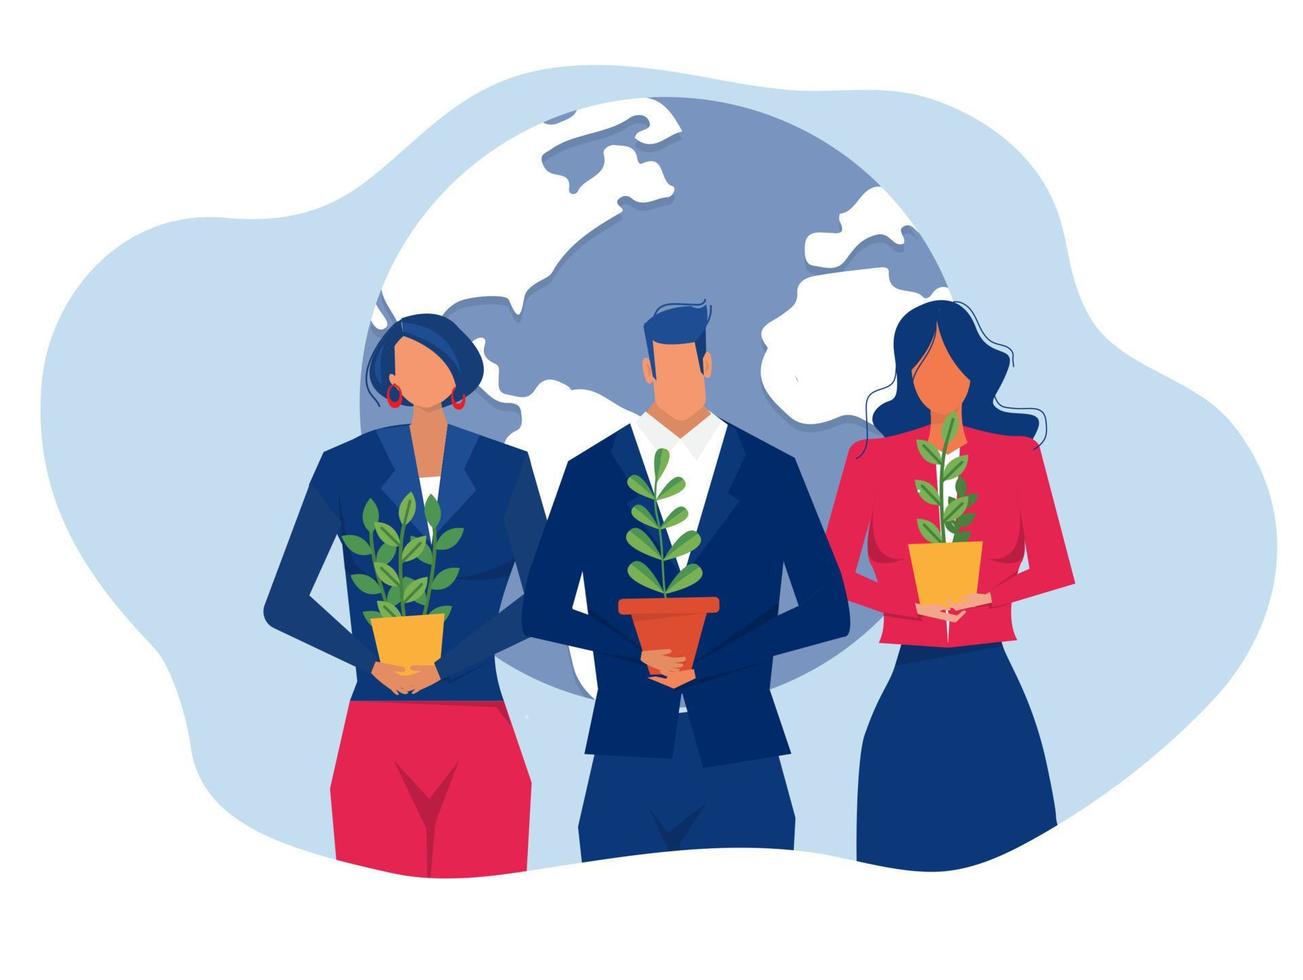 Team business holding  plants cooperation Nature on earth day conservation  Eco friendly ecology ESG or ecology problem concept.  vector illustration